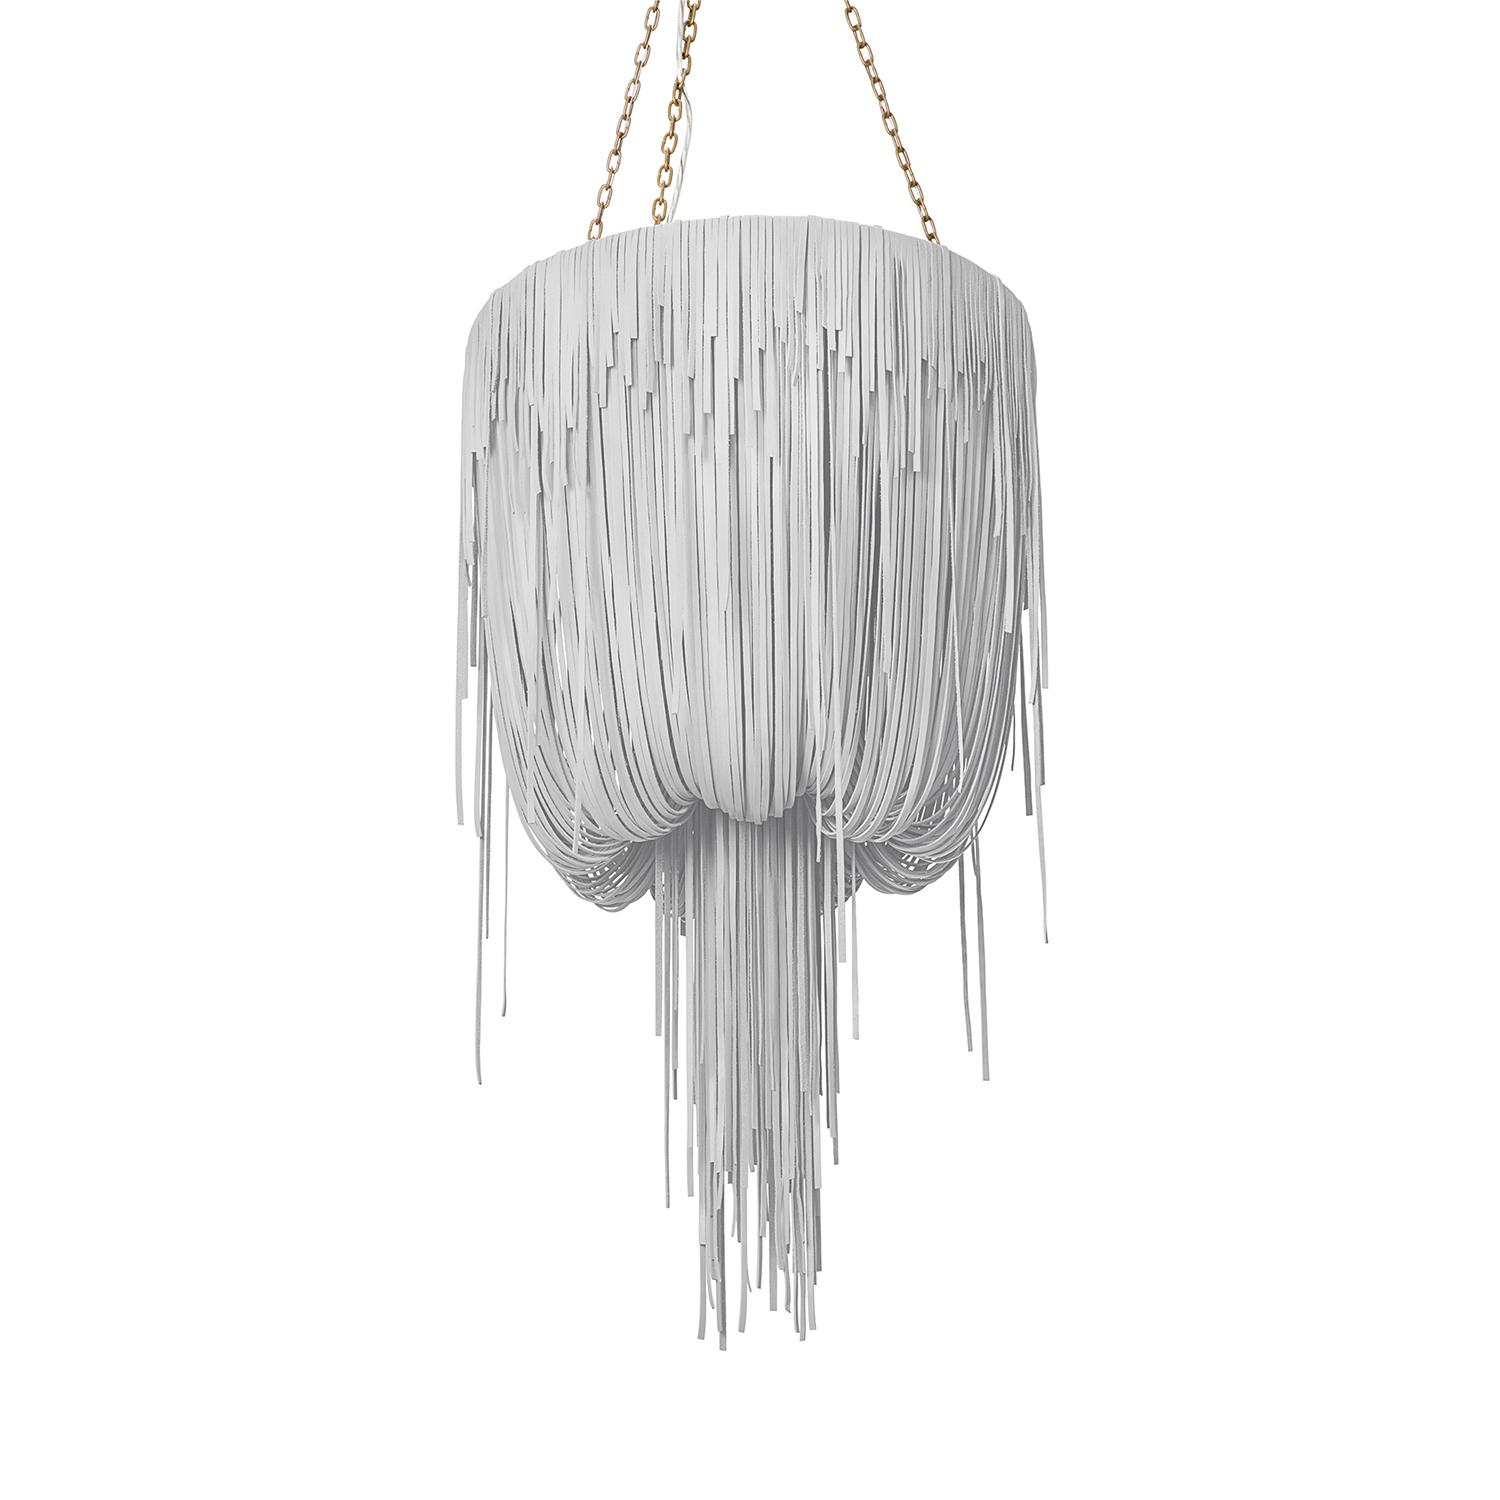 Small Round Urchin Leather Chandelier in Metallic Leather